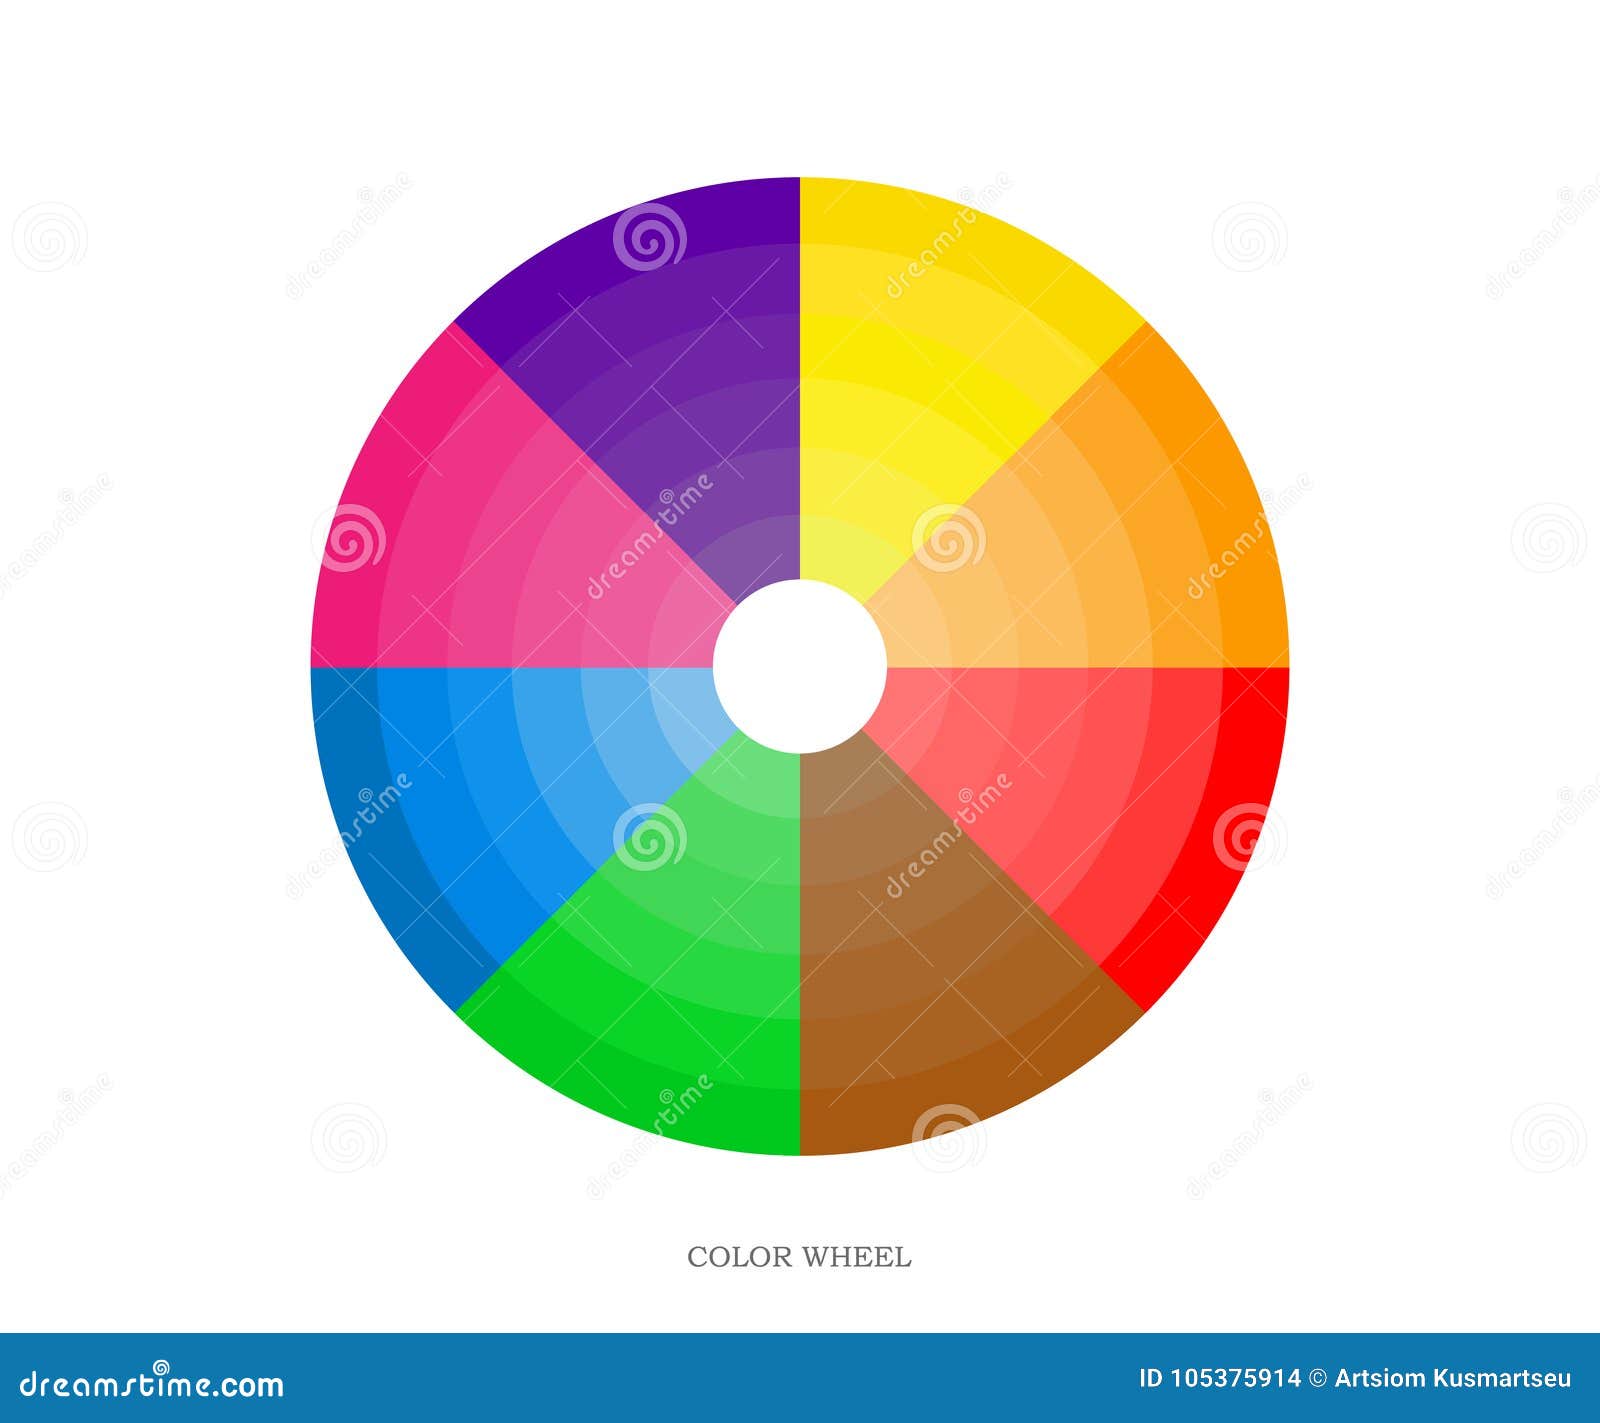 How To Use Colour Wheel Chart